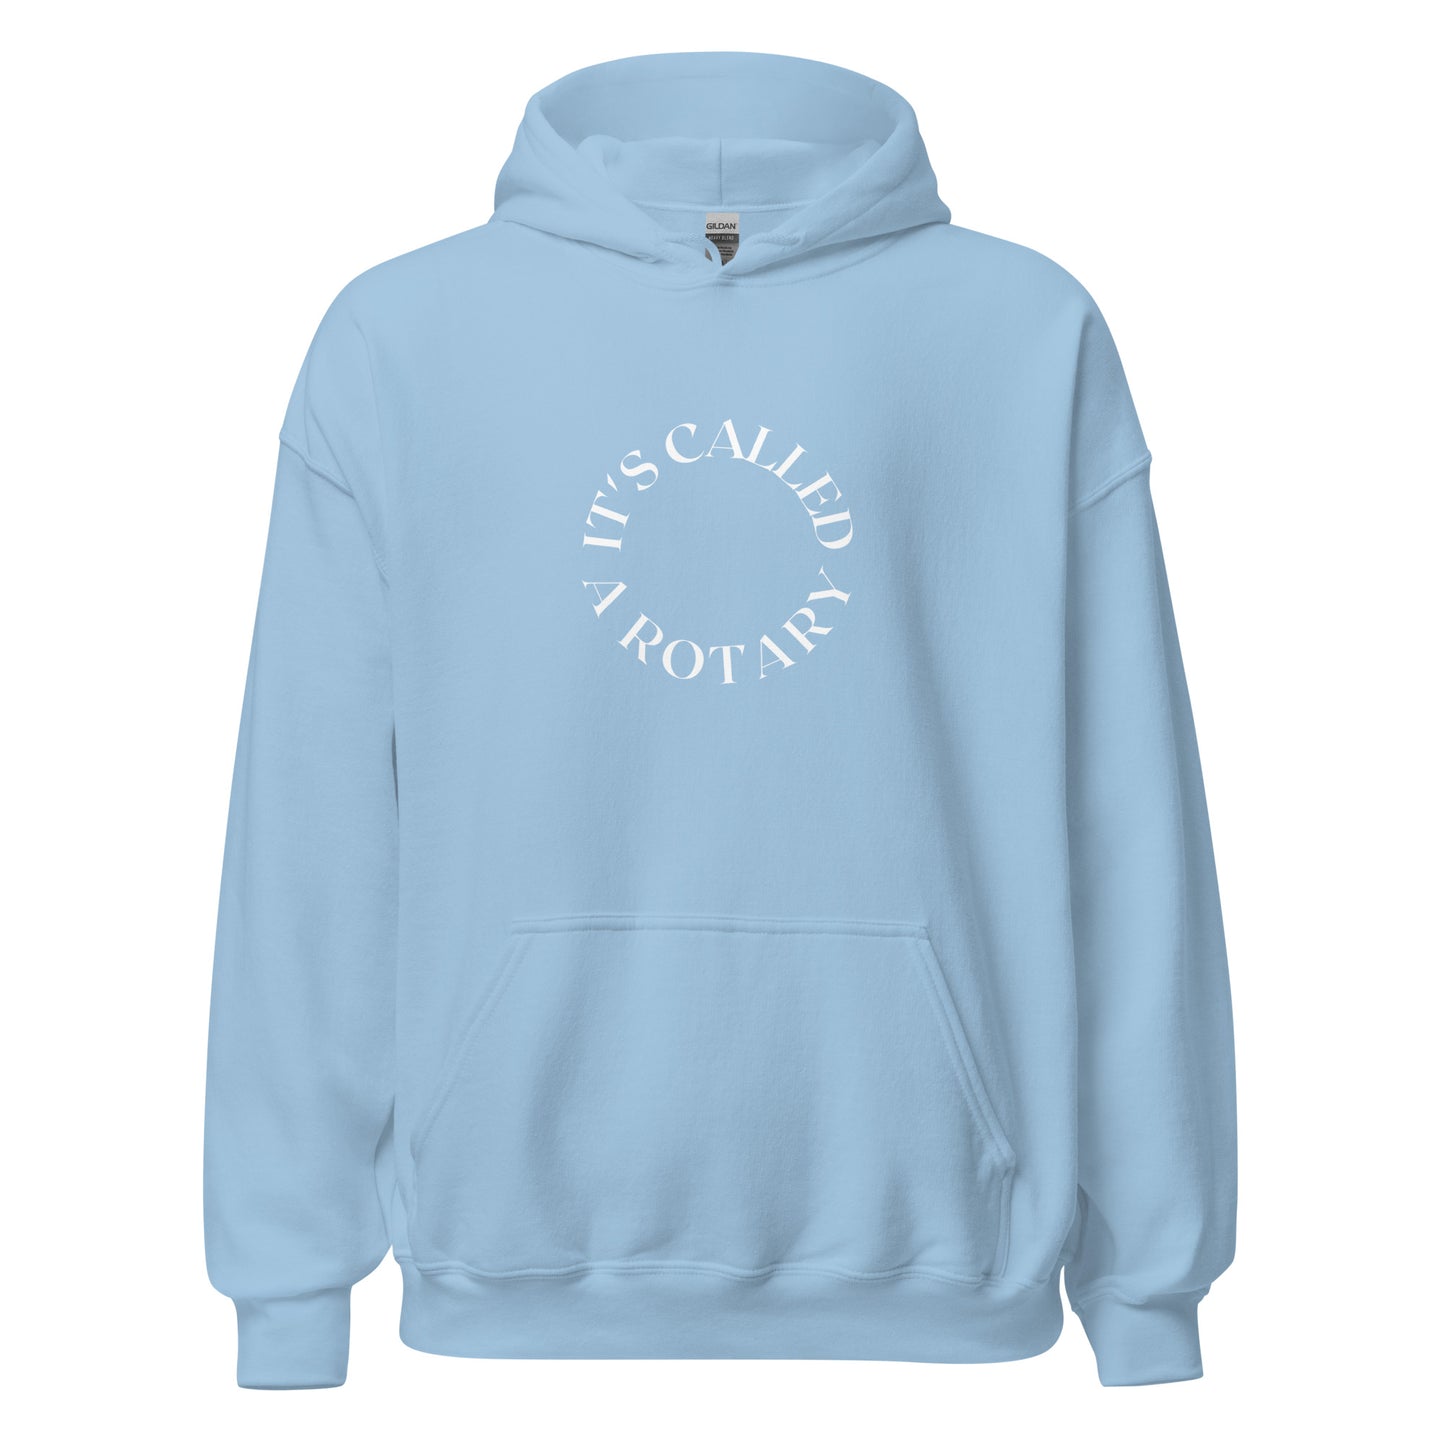 sky blue hoodie that saying "it's called a rotary" in white lettering shaped in a circle